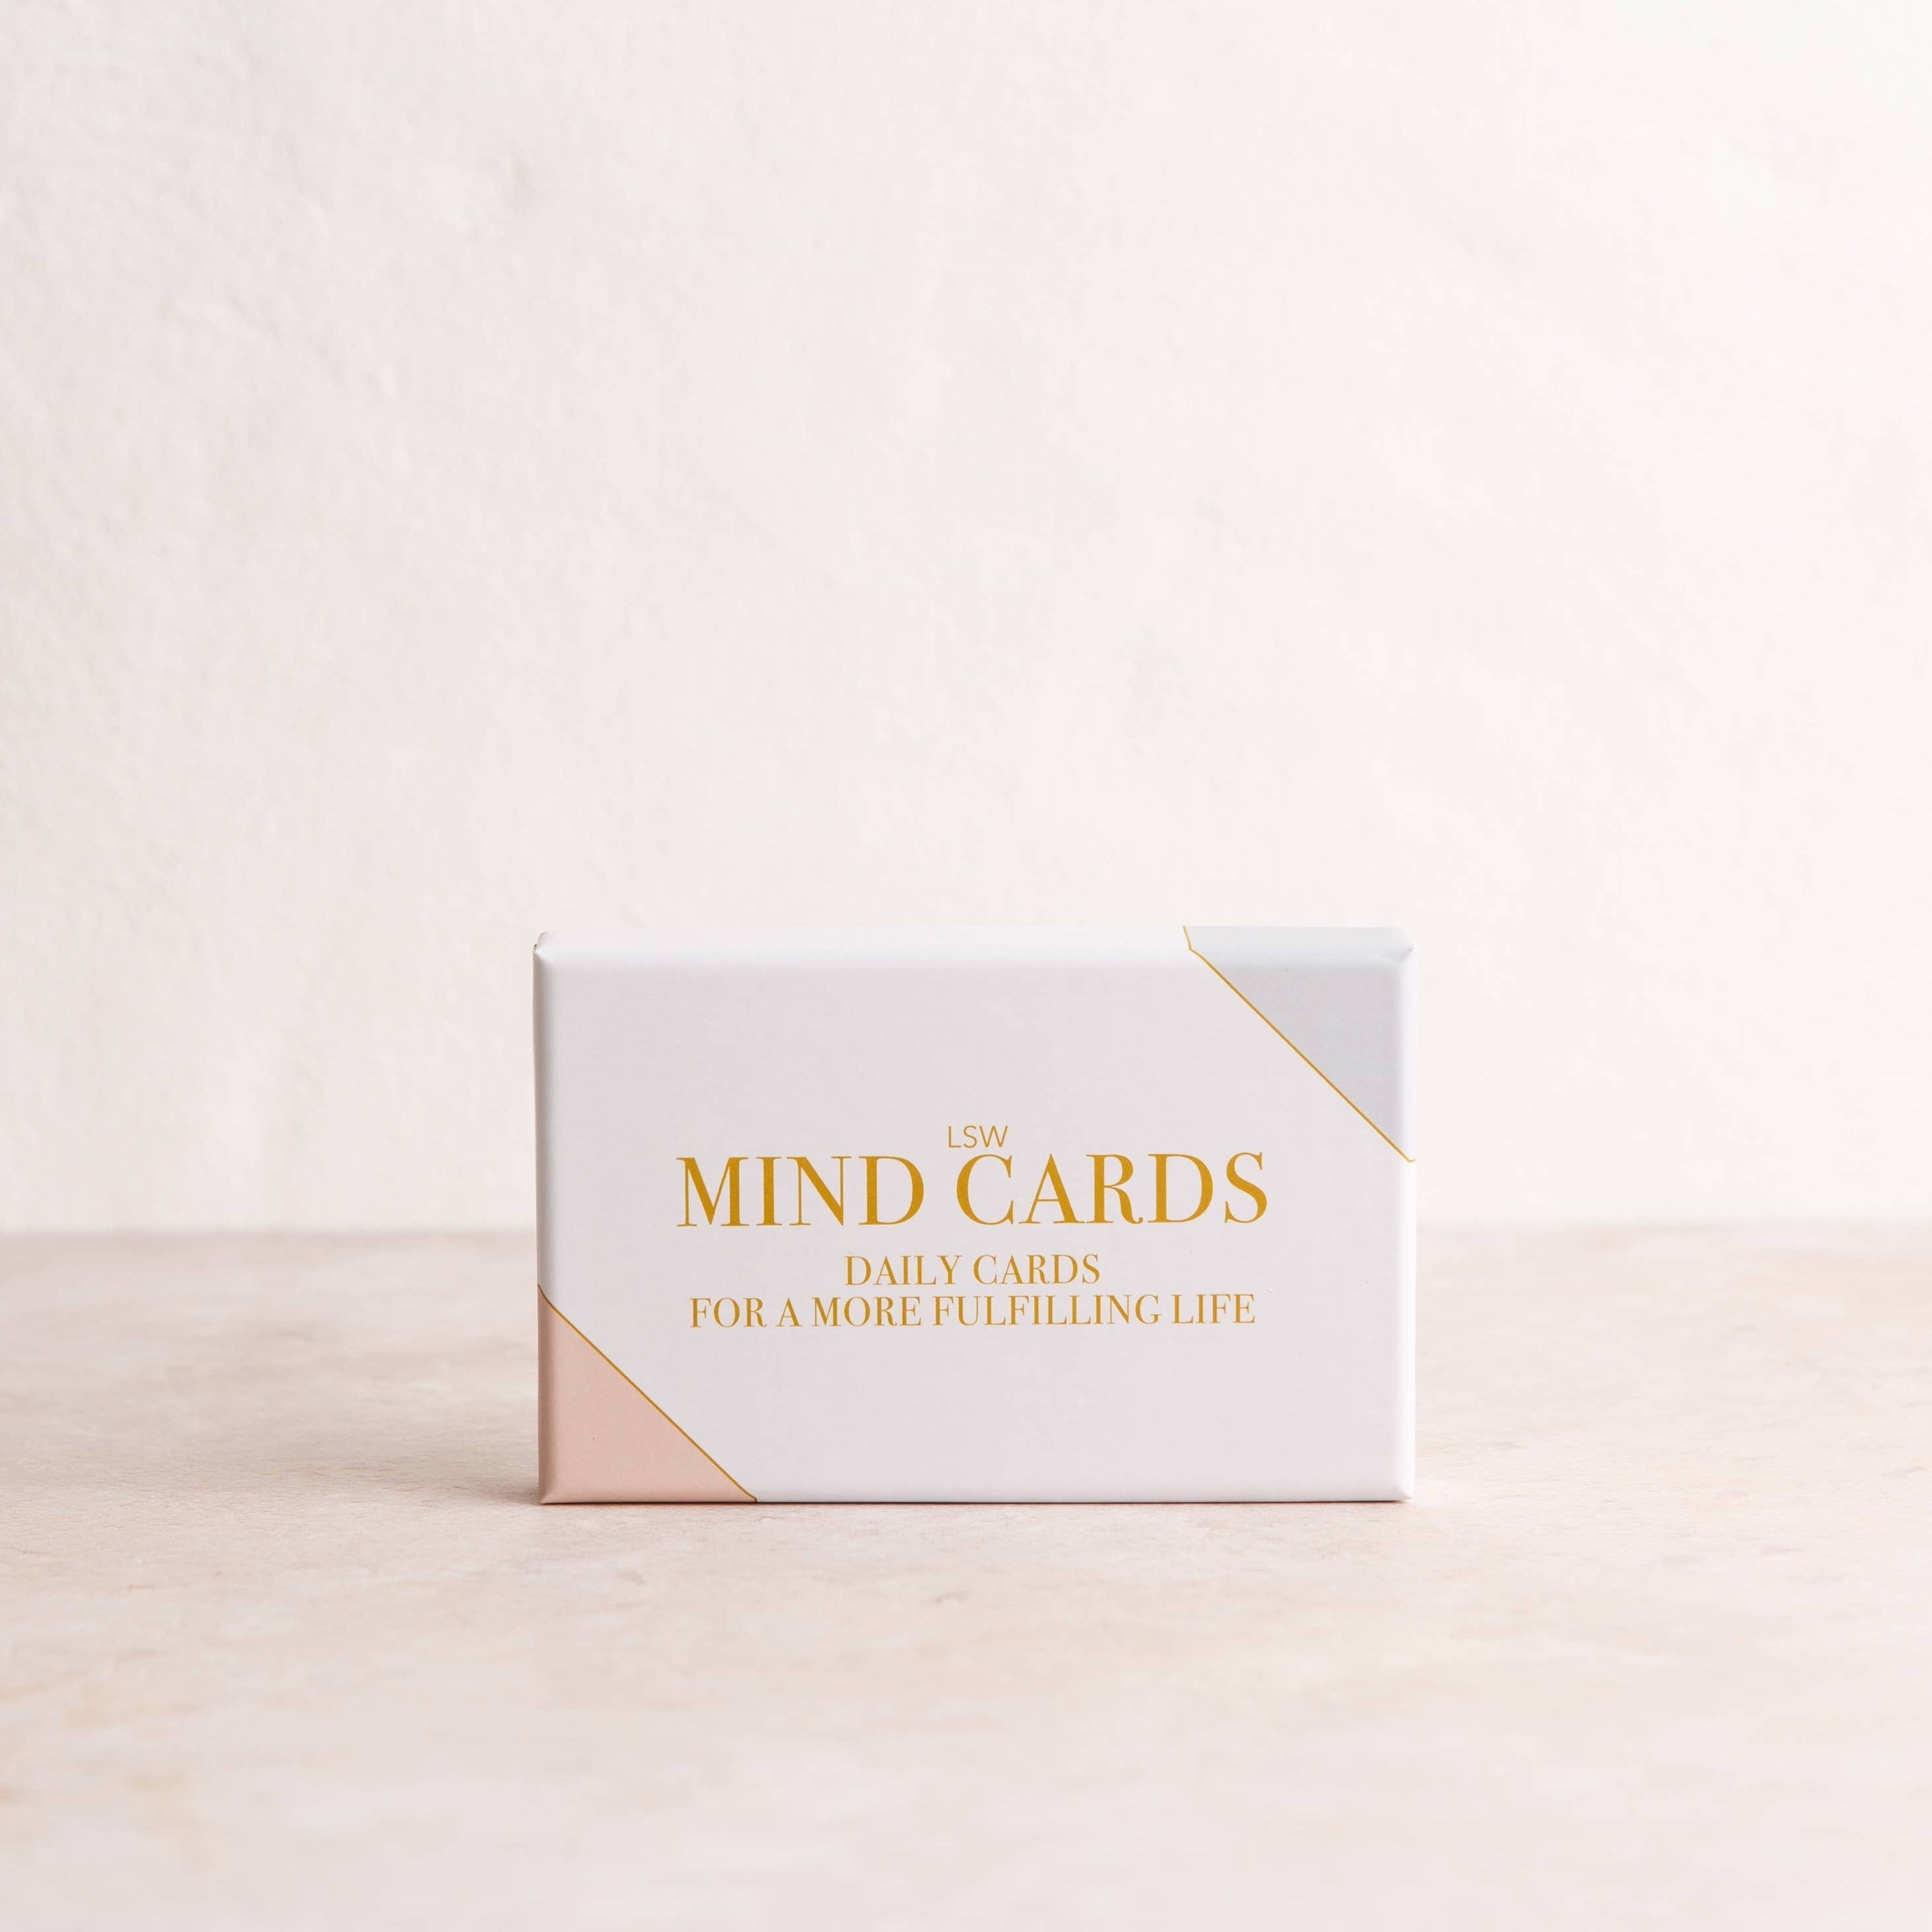 Daily mindfulness cards